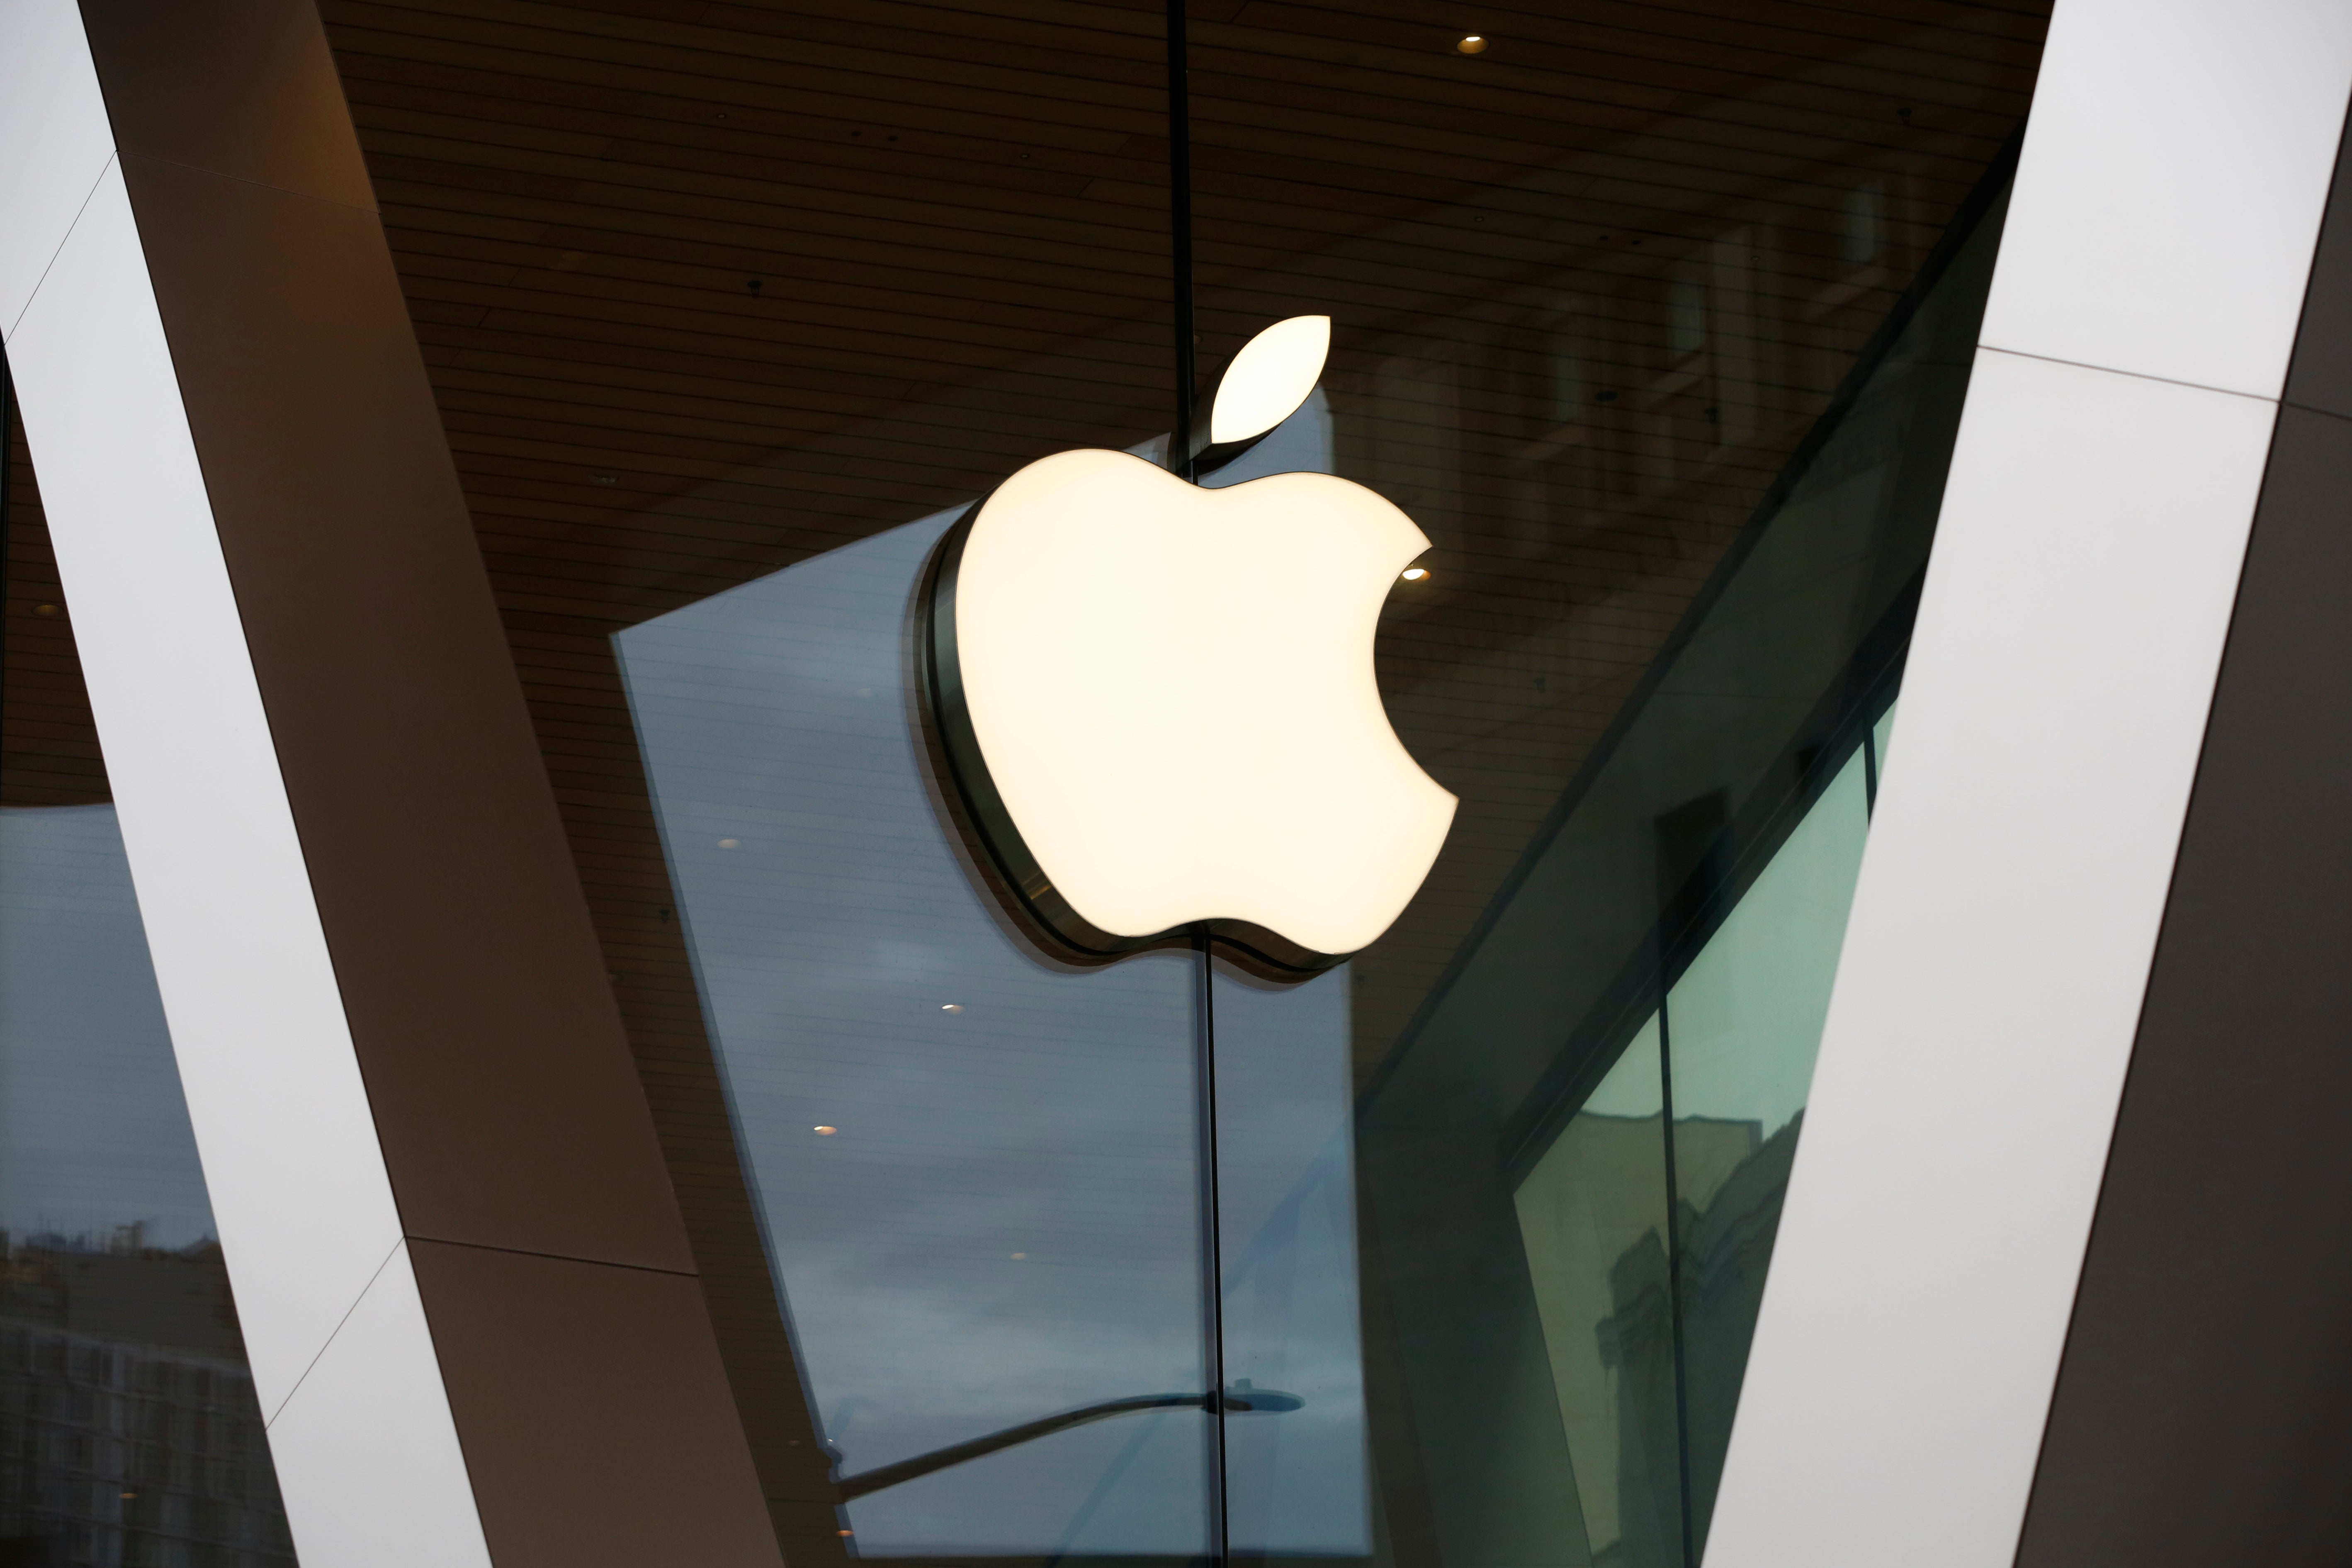 Apple says from now on it will limit the amount of data it hands over to investigators